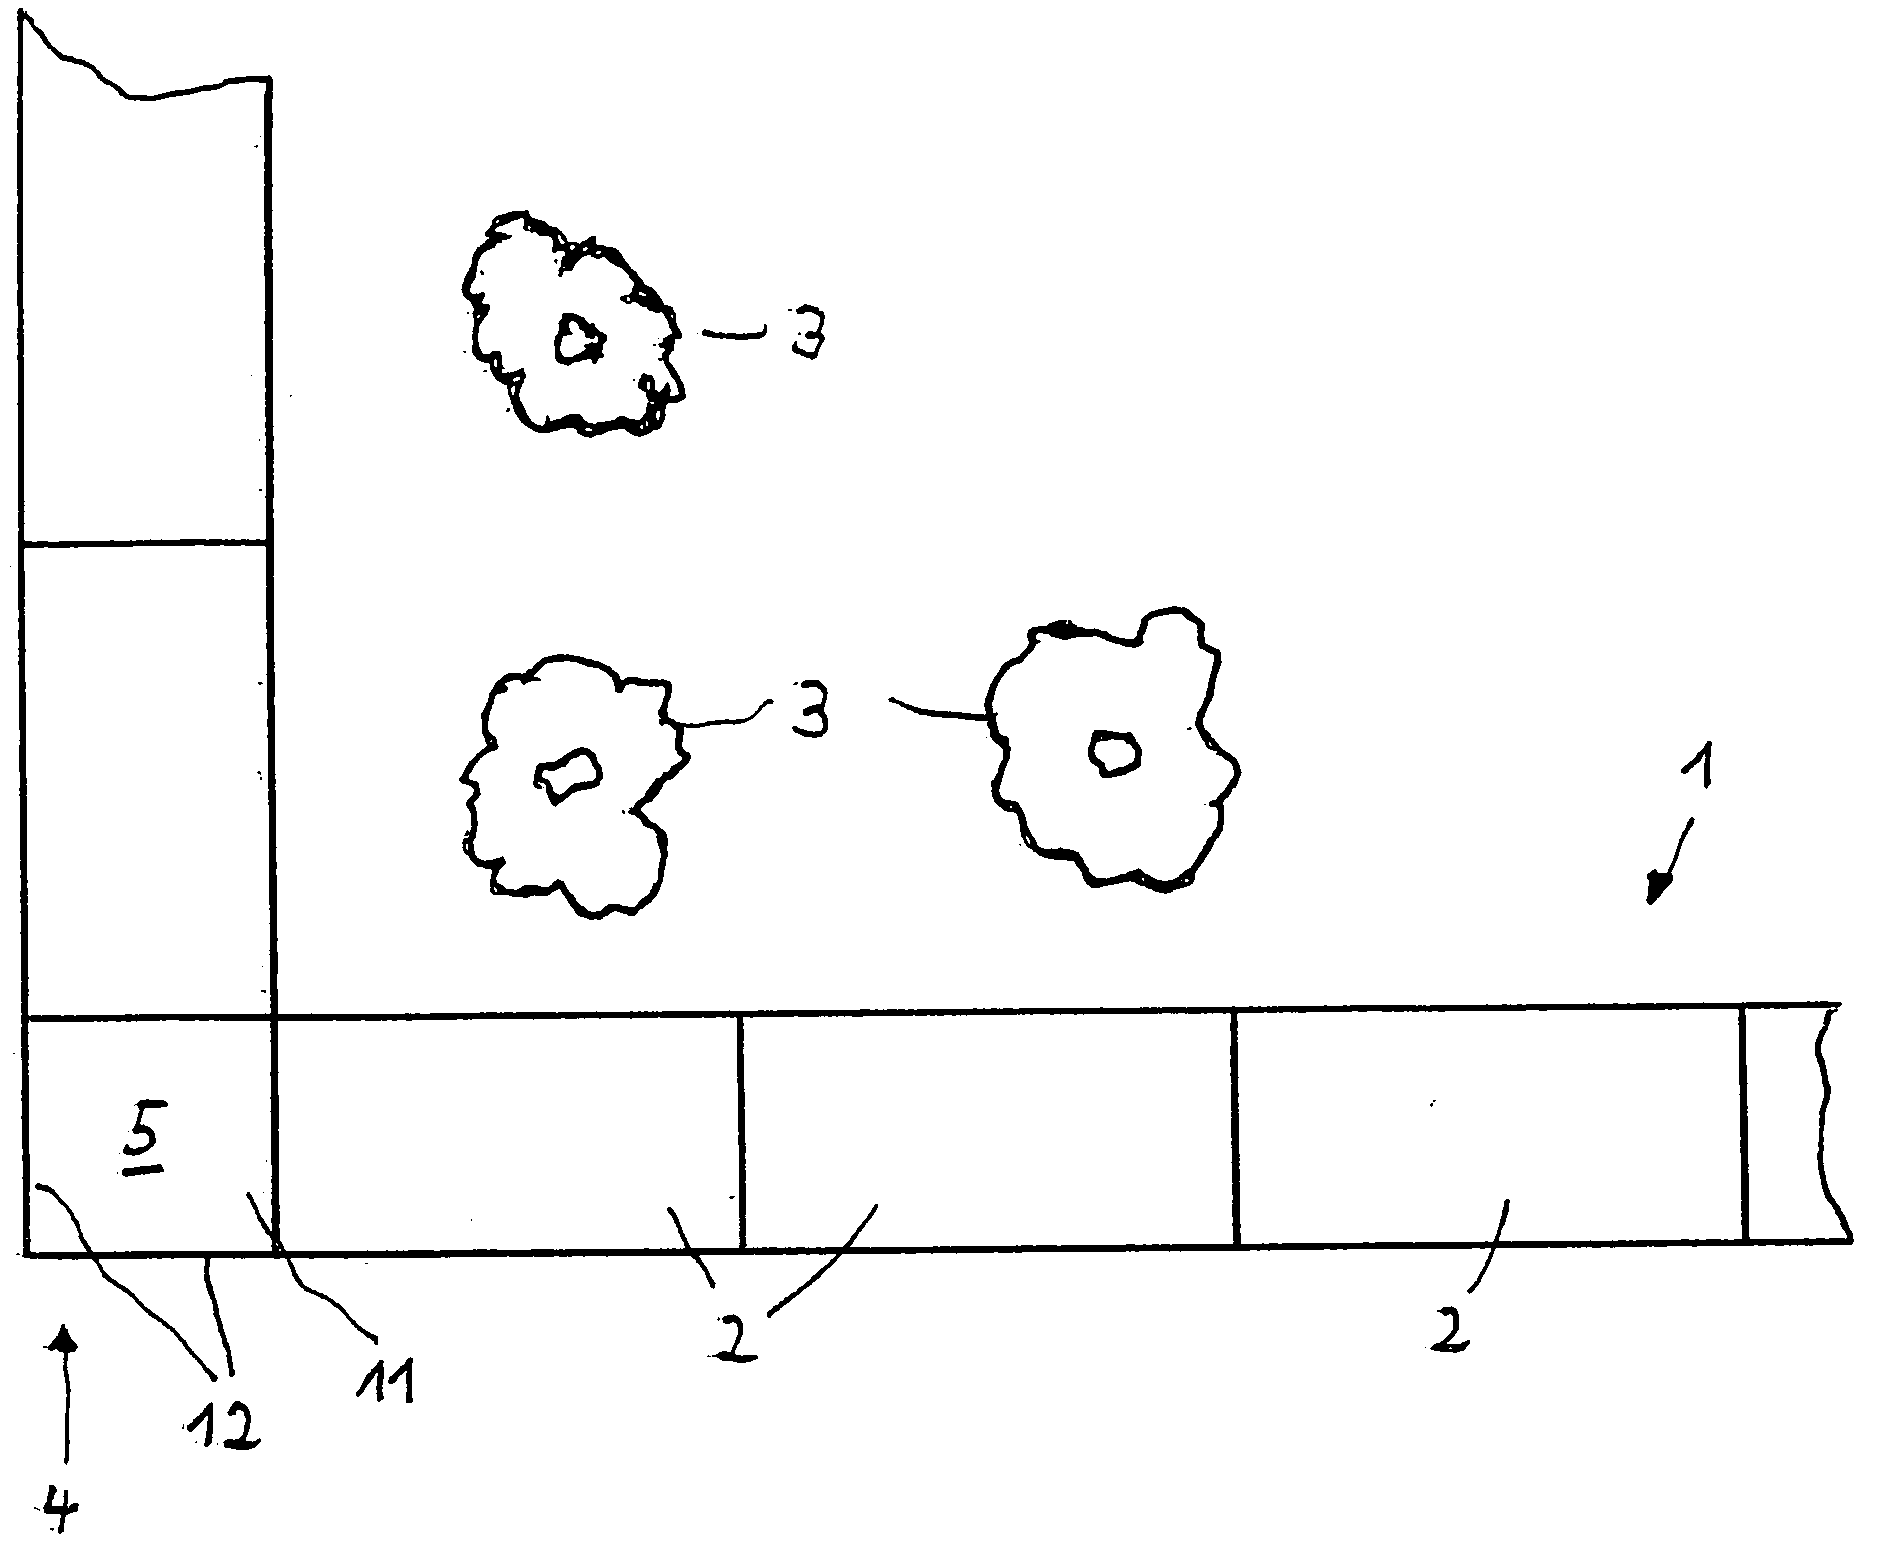 System for repelling small mammals